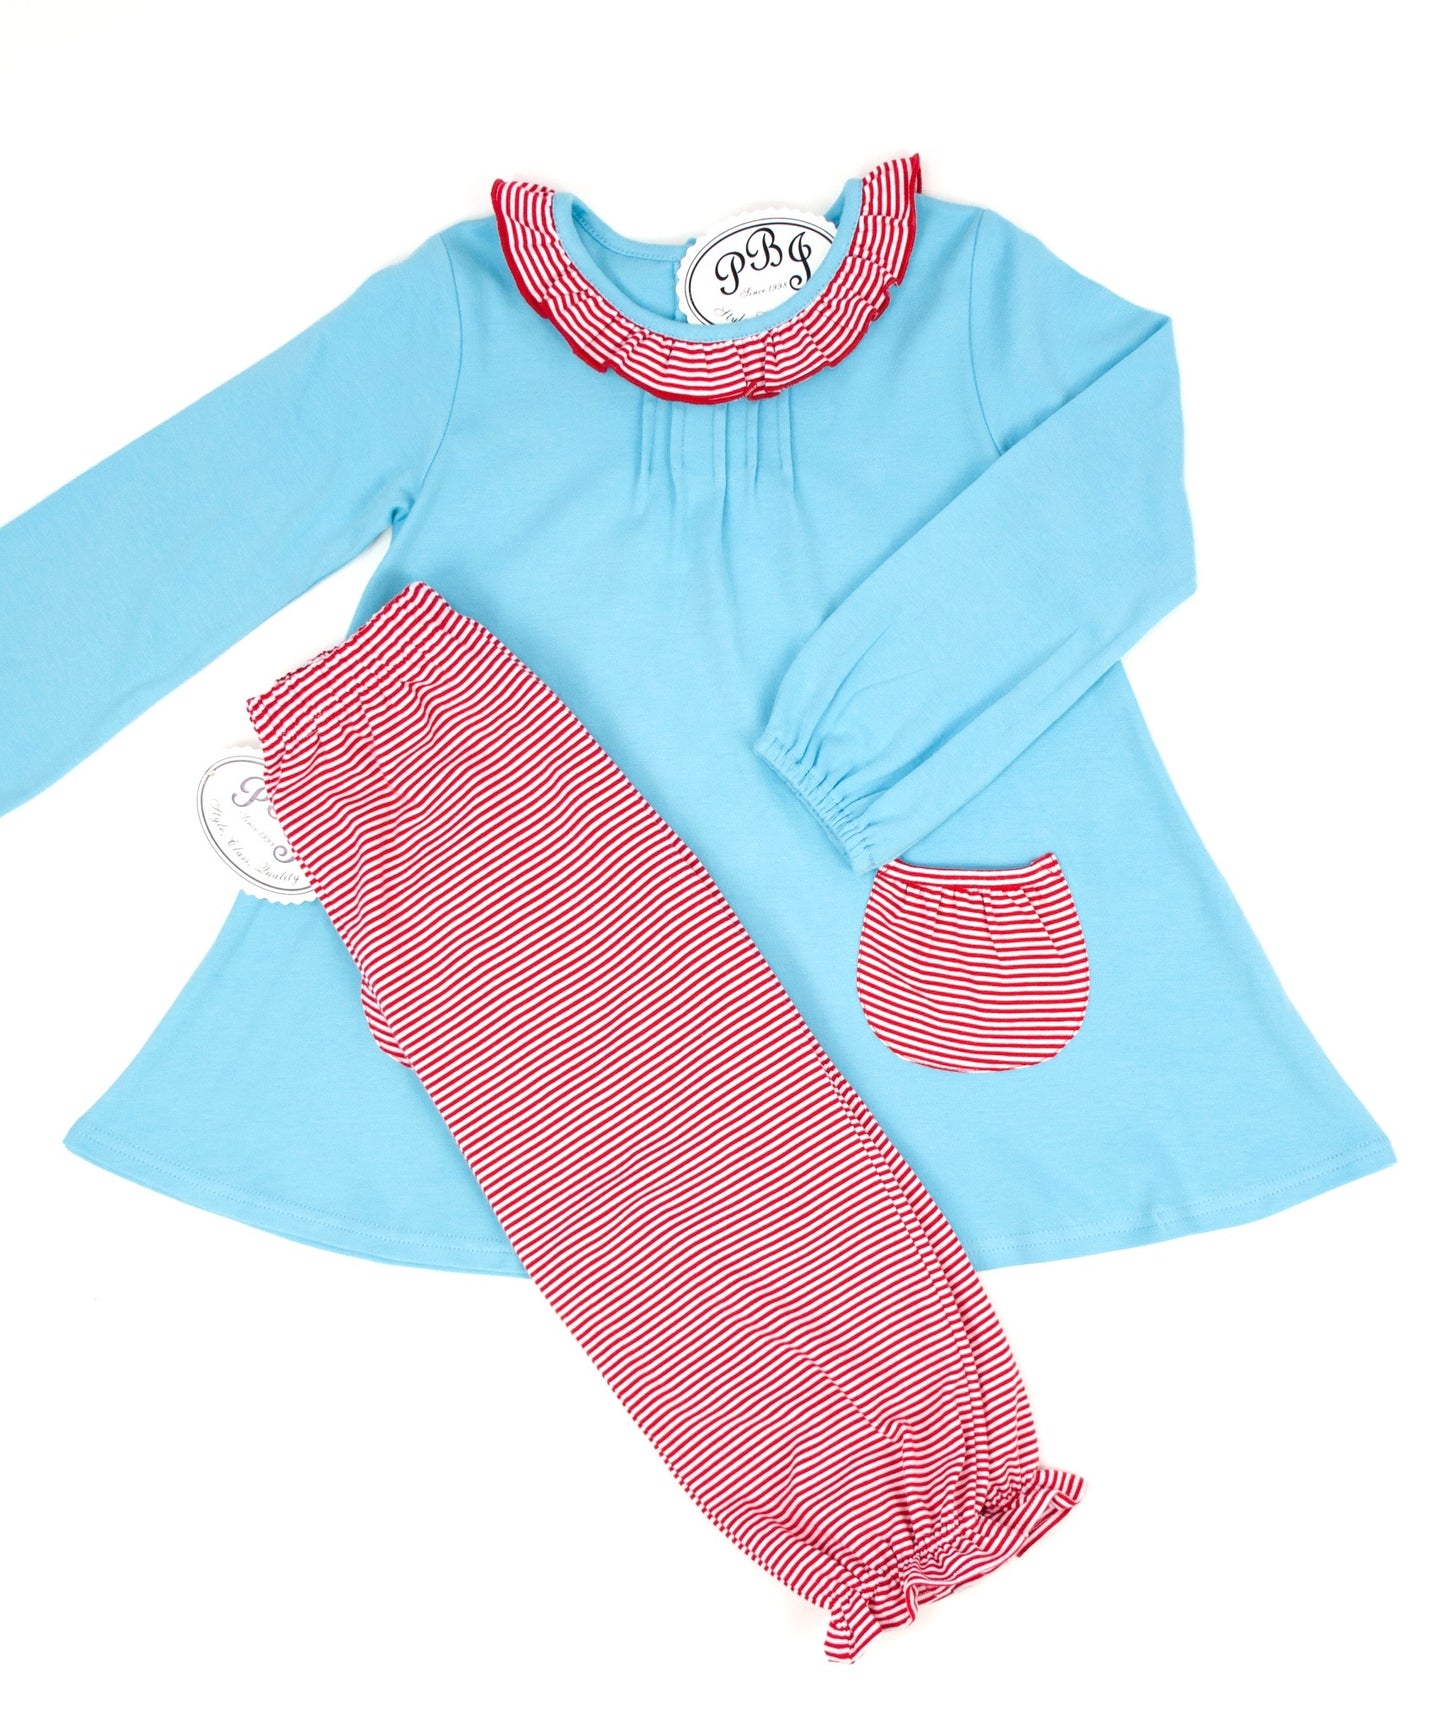 Pintucked Tunic w/ pockets Aqua and red stripes